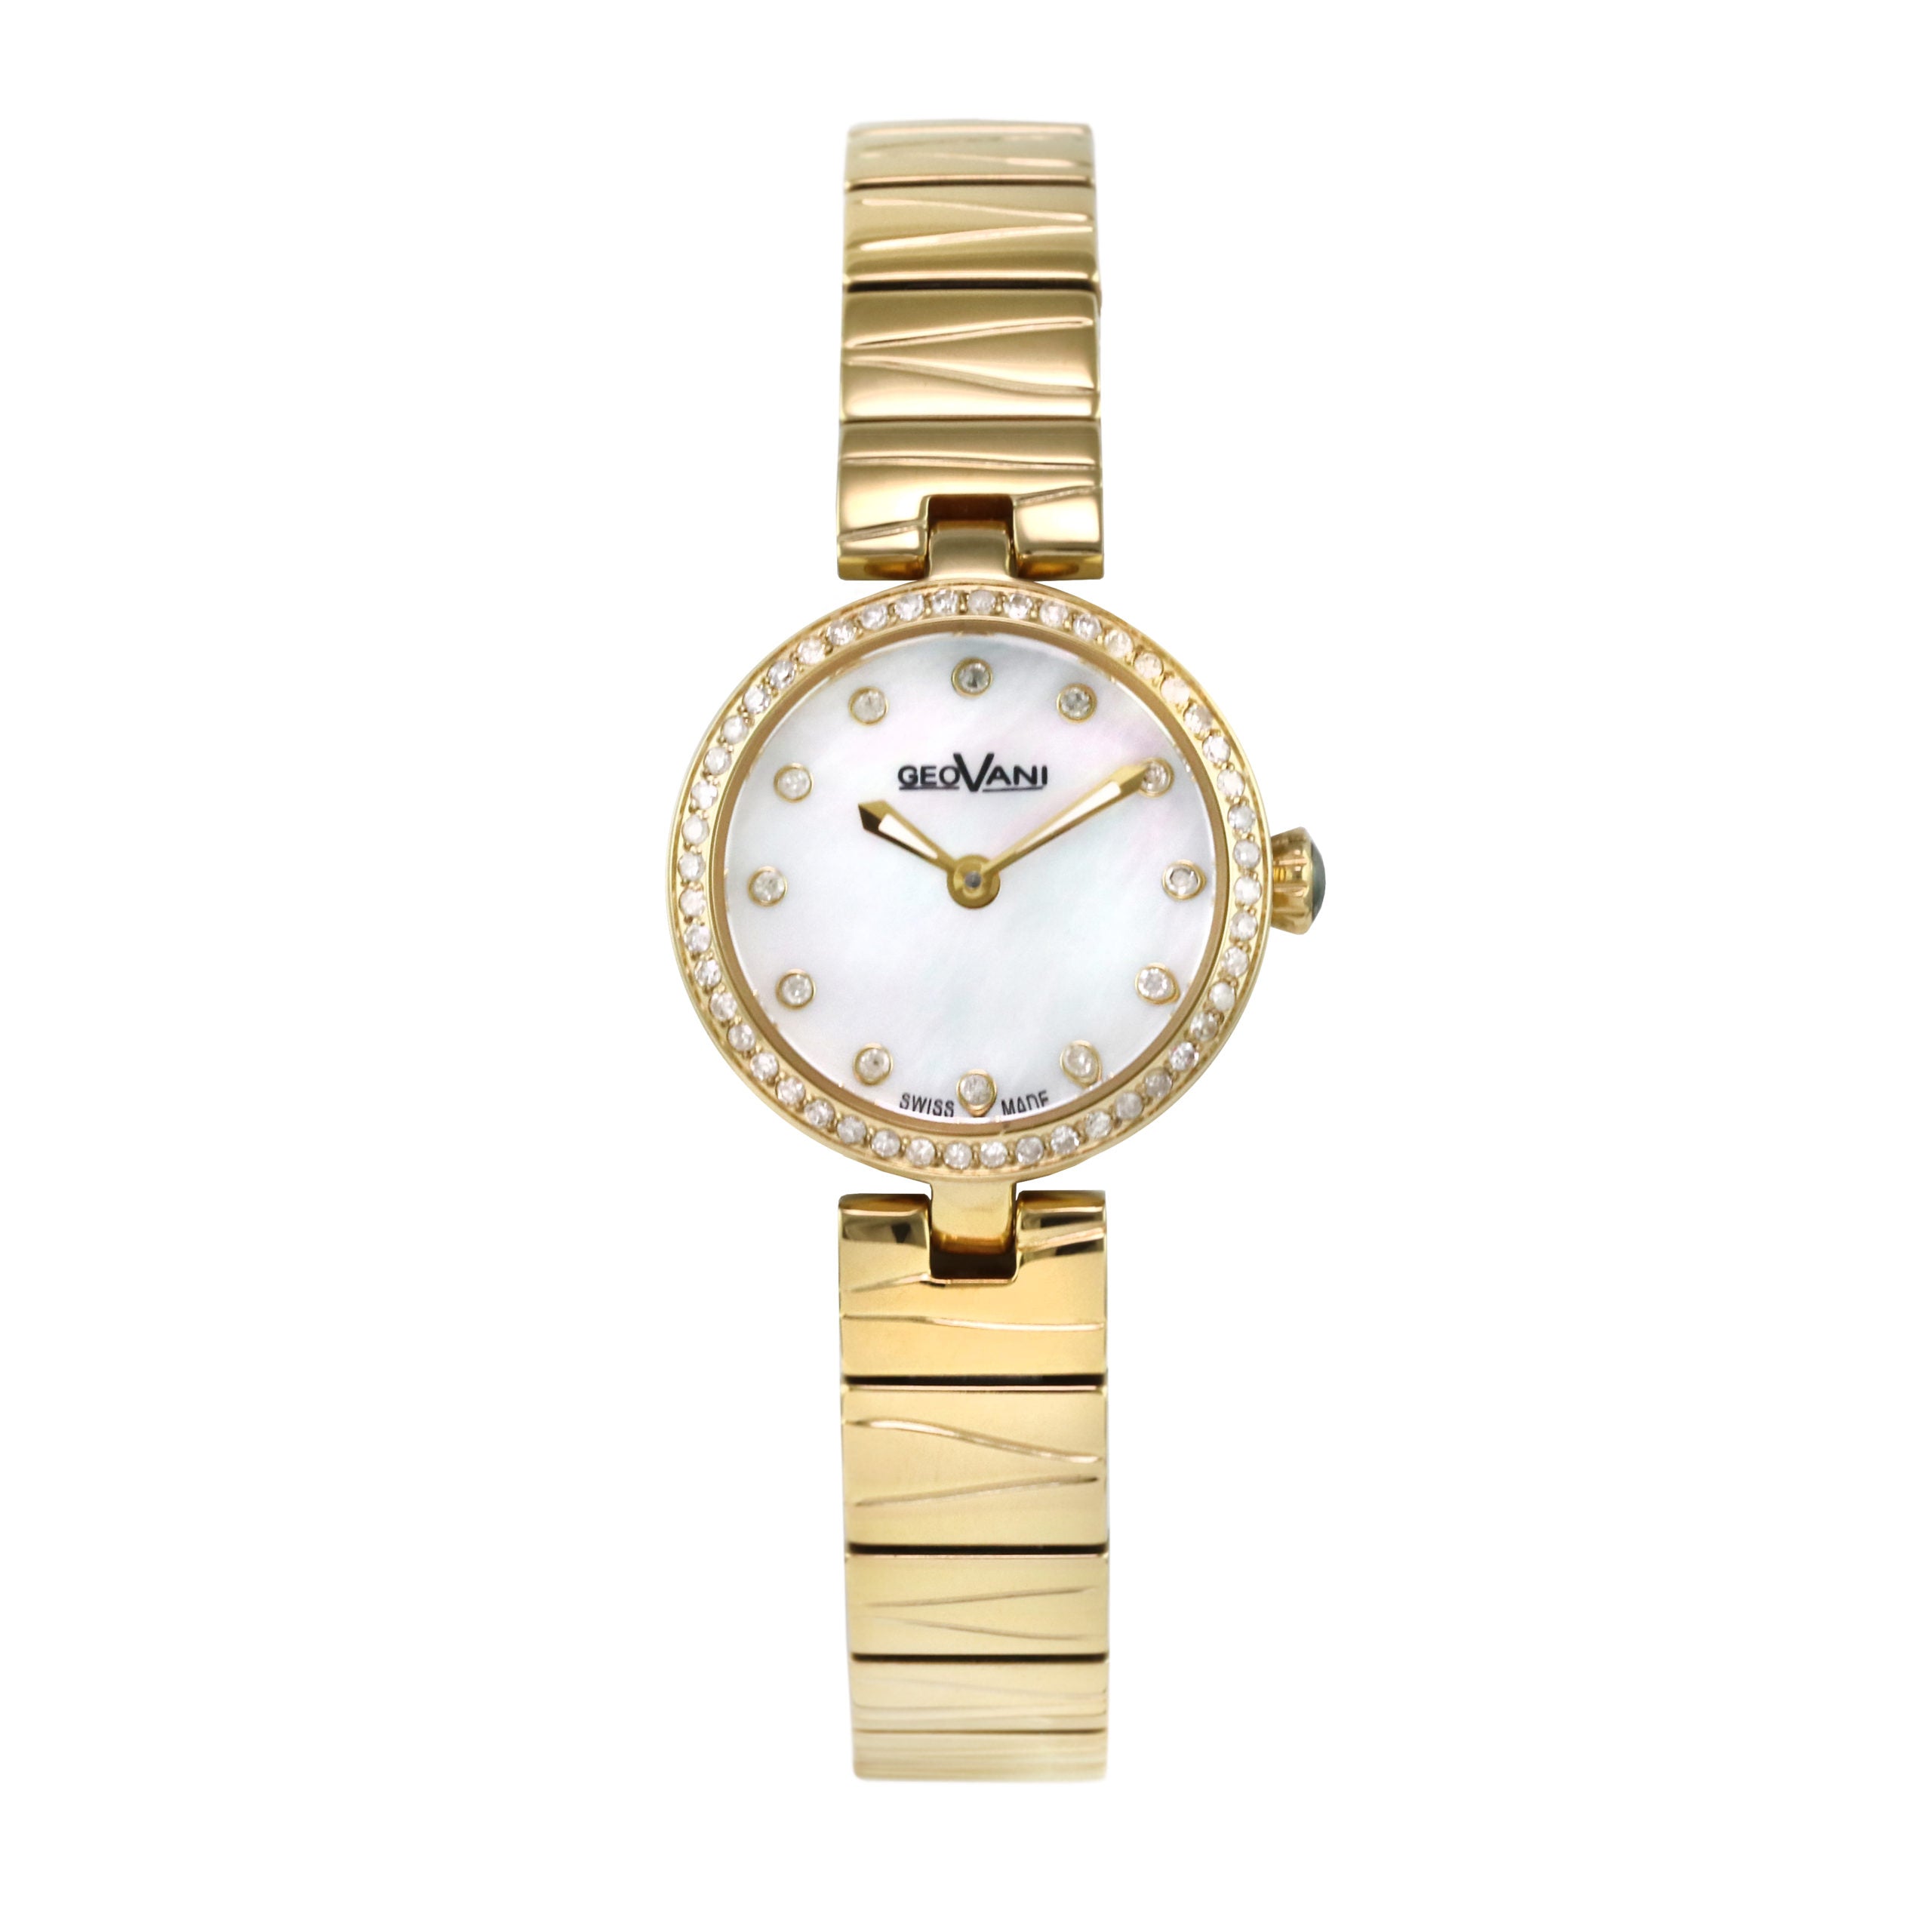 Giovanni Women's Swiss Quartz Watch with Pearly White Dial - GEO-0001